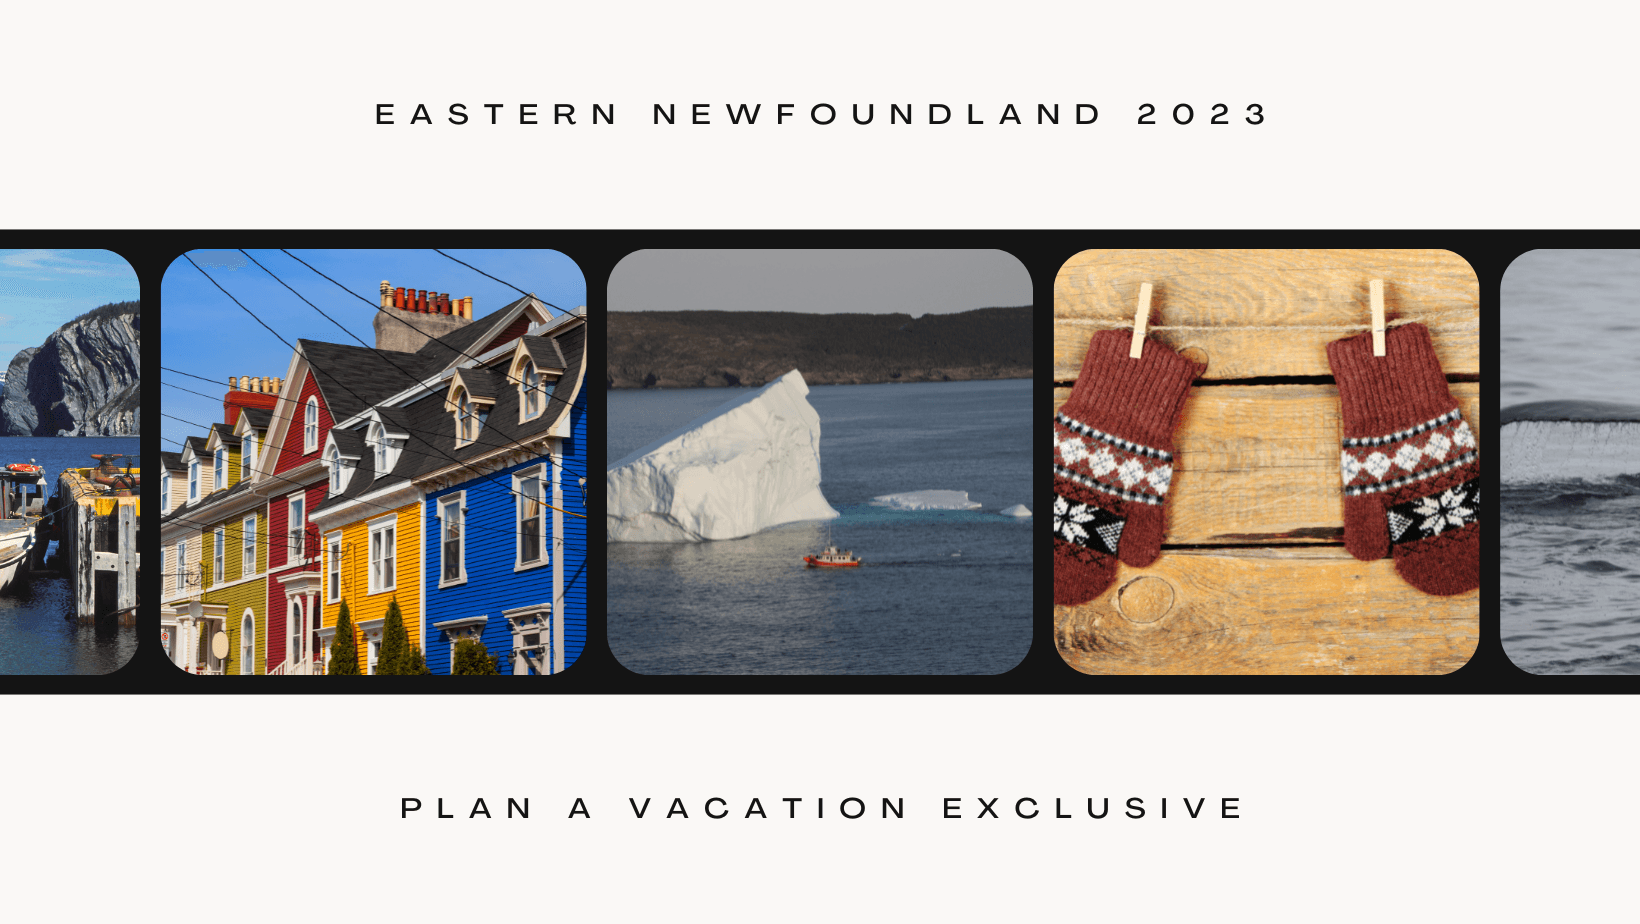 Plan A Vacation to Newfoundland 2023 - background banner